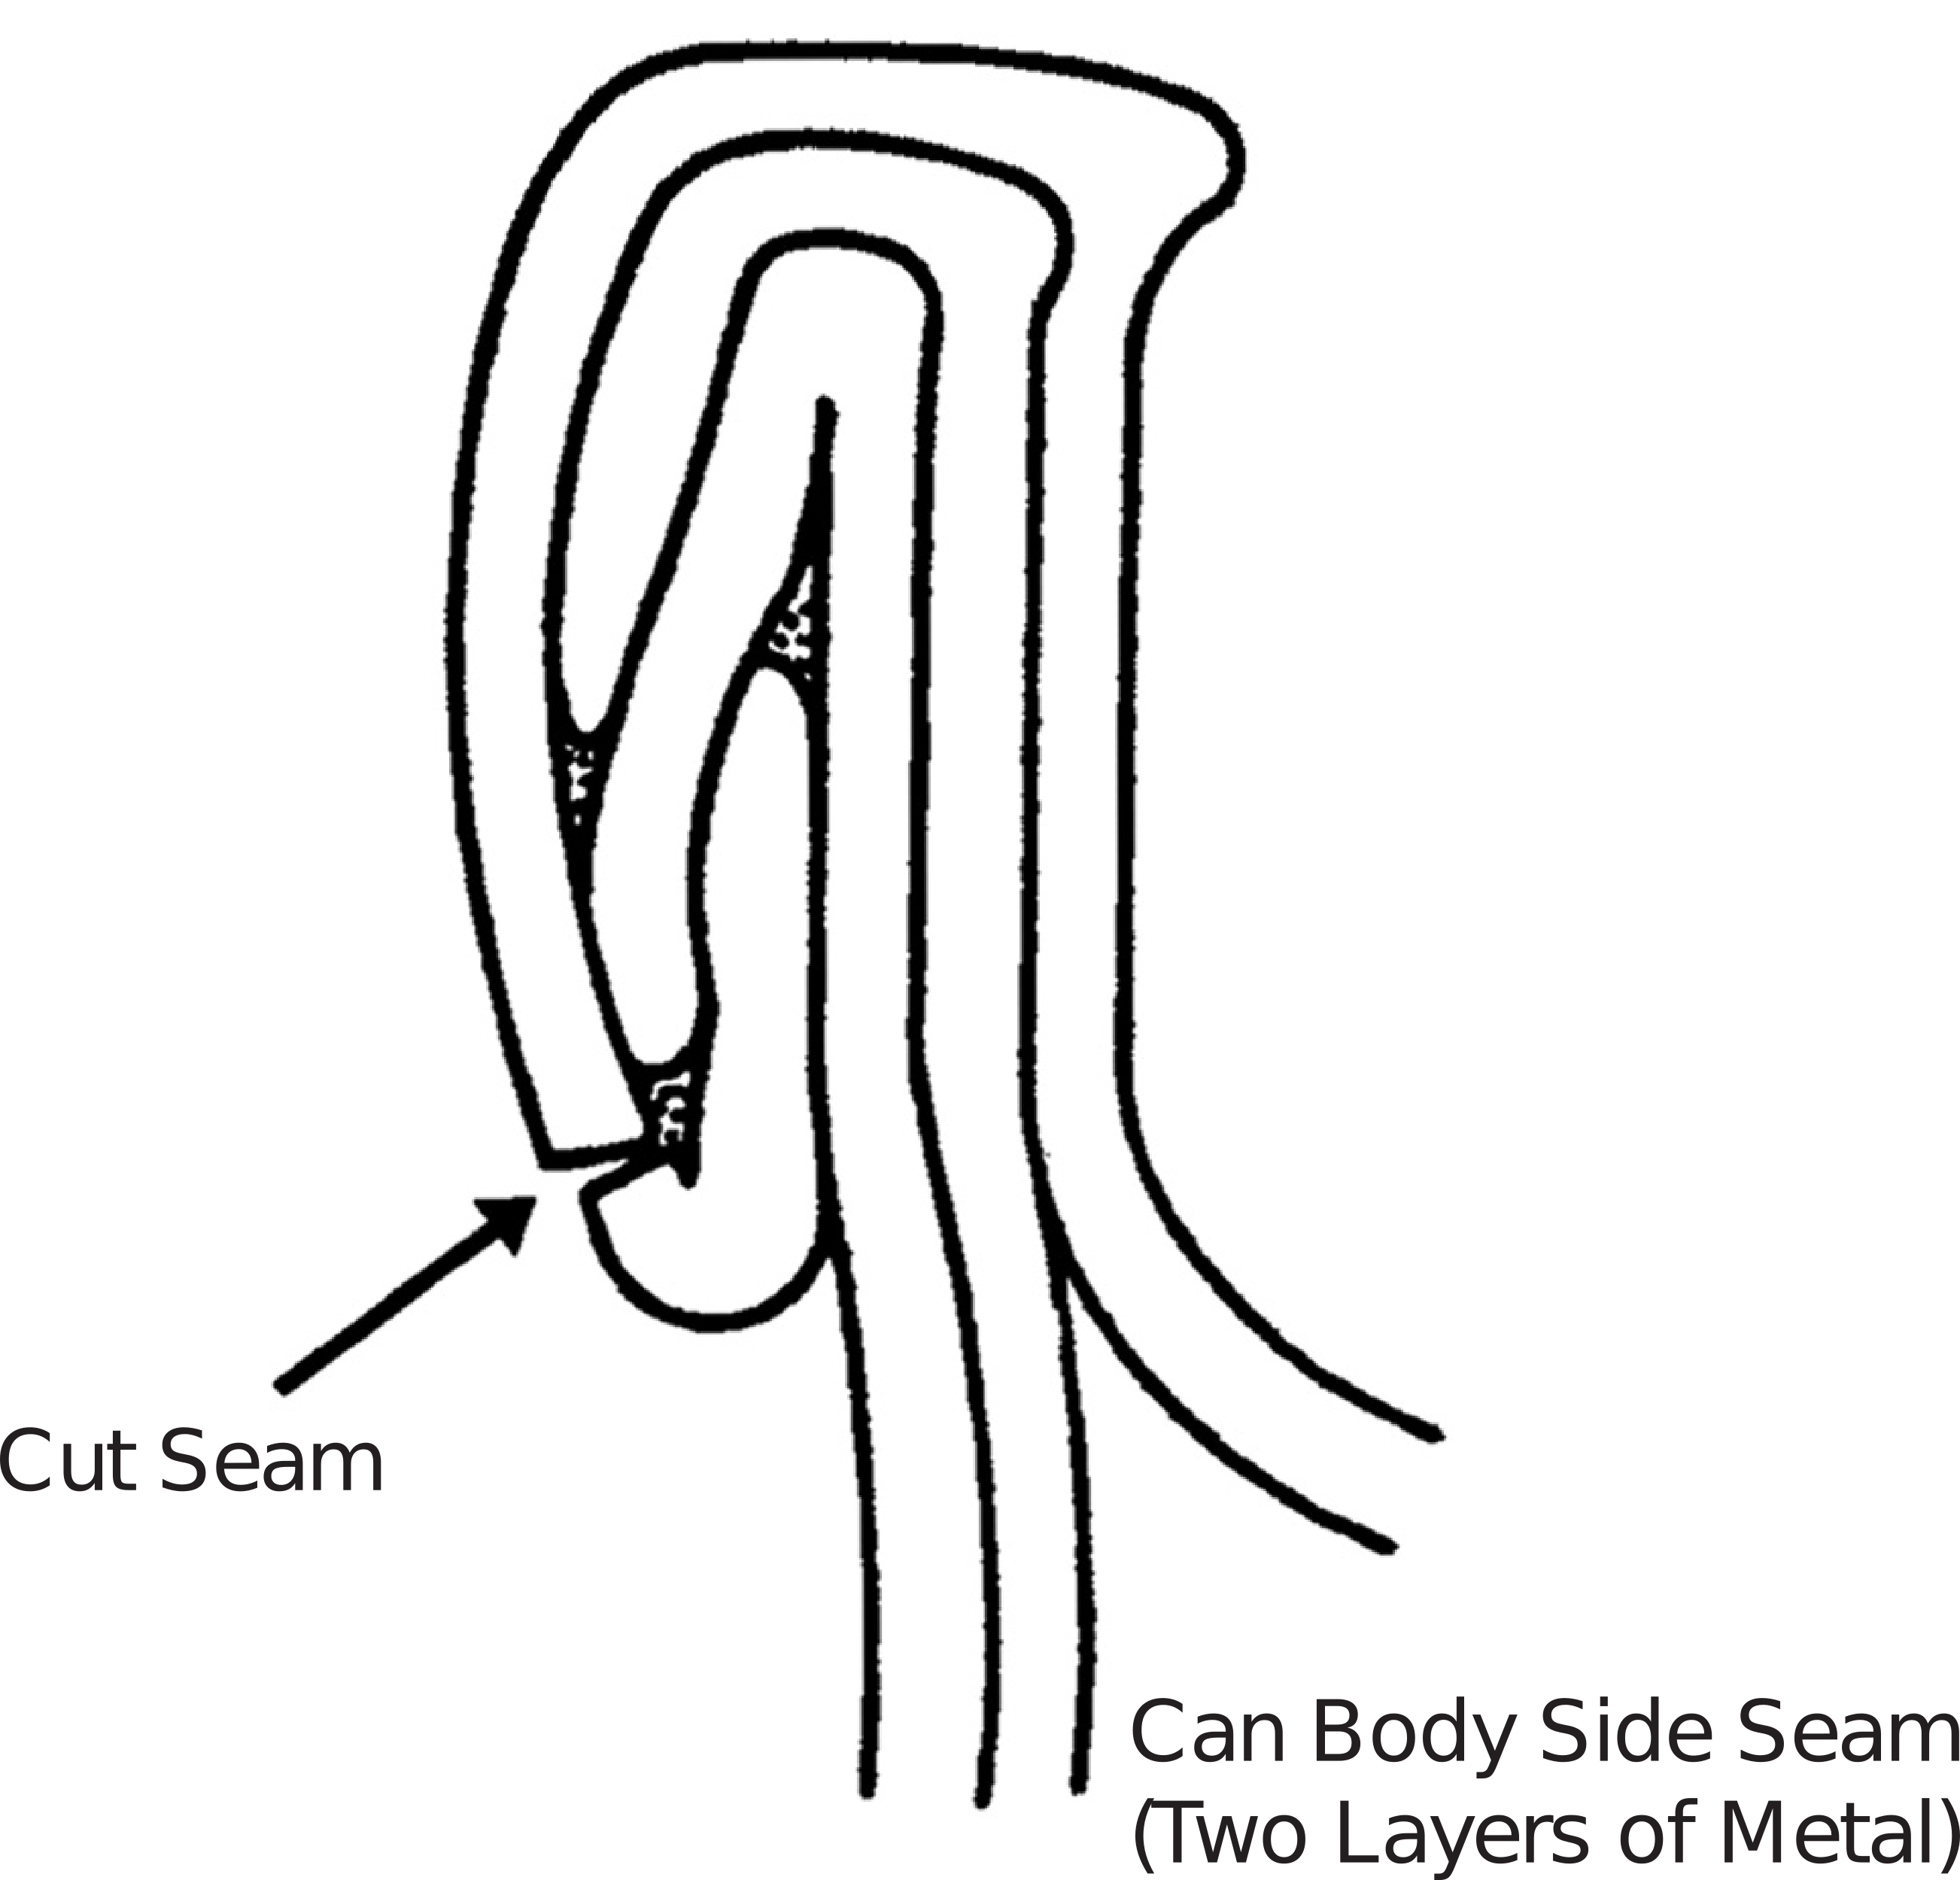 Can body Side Seam with two layers of metal, with an arrow pointing to the cut seam